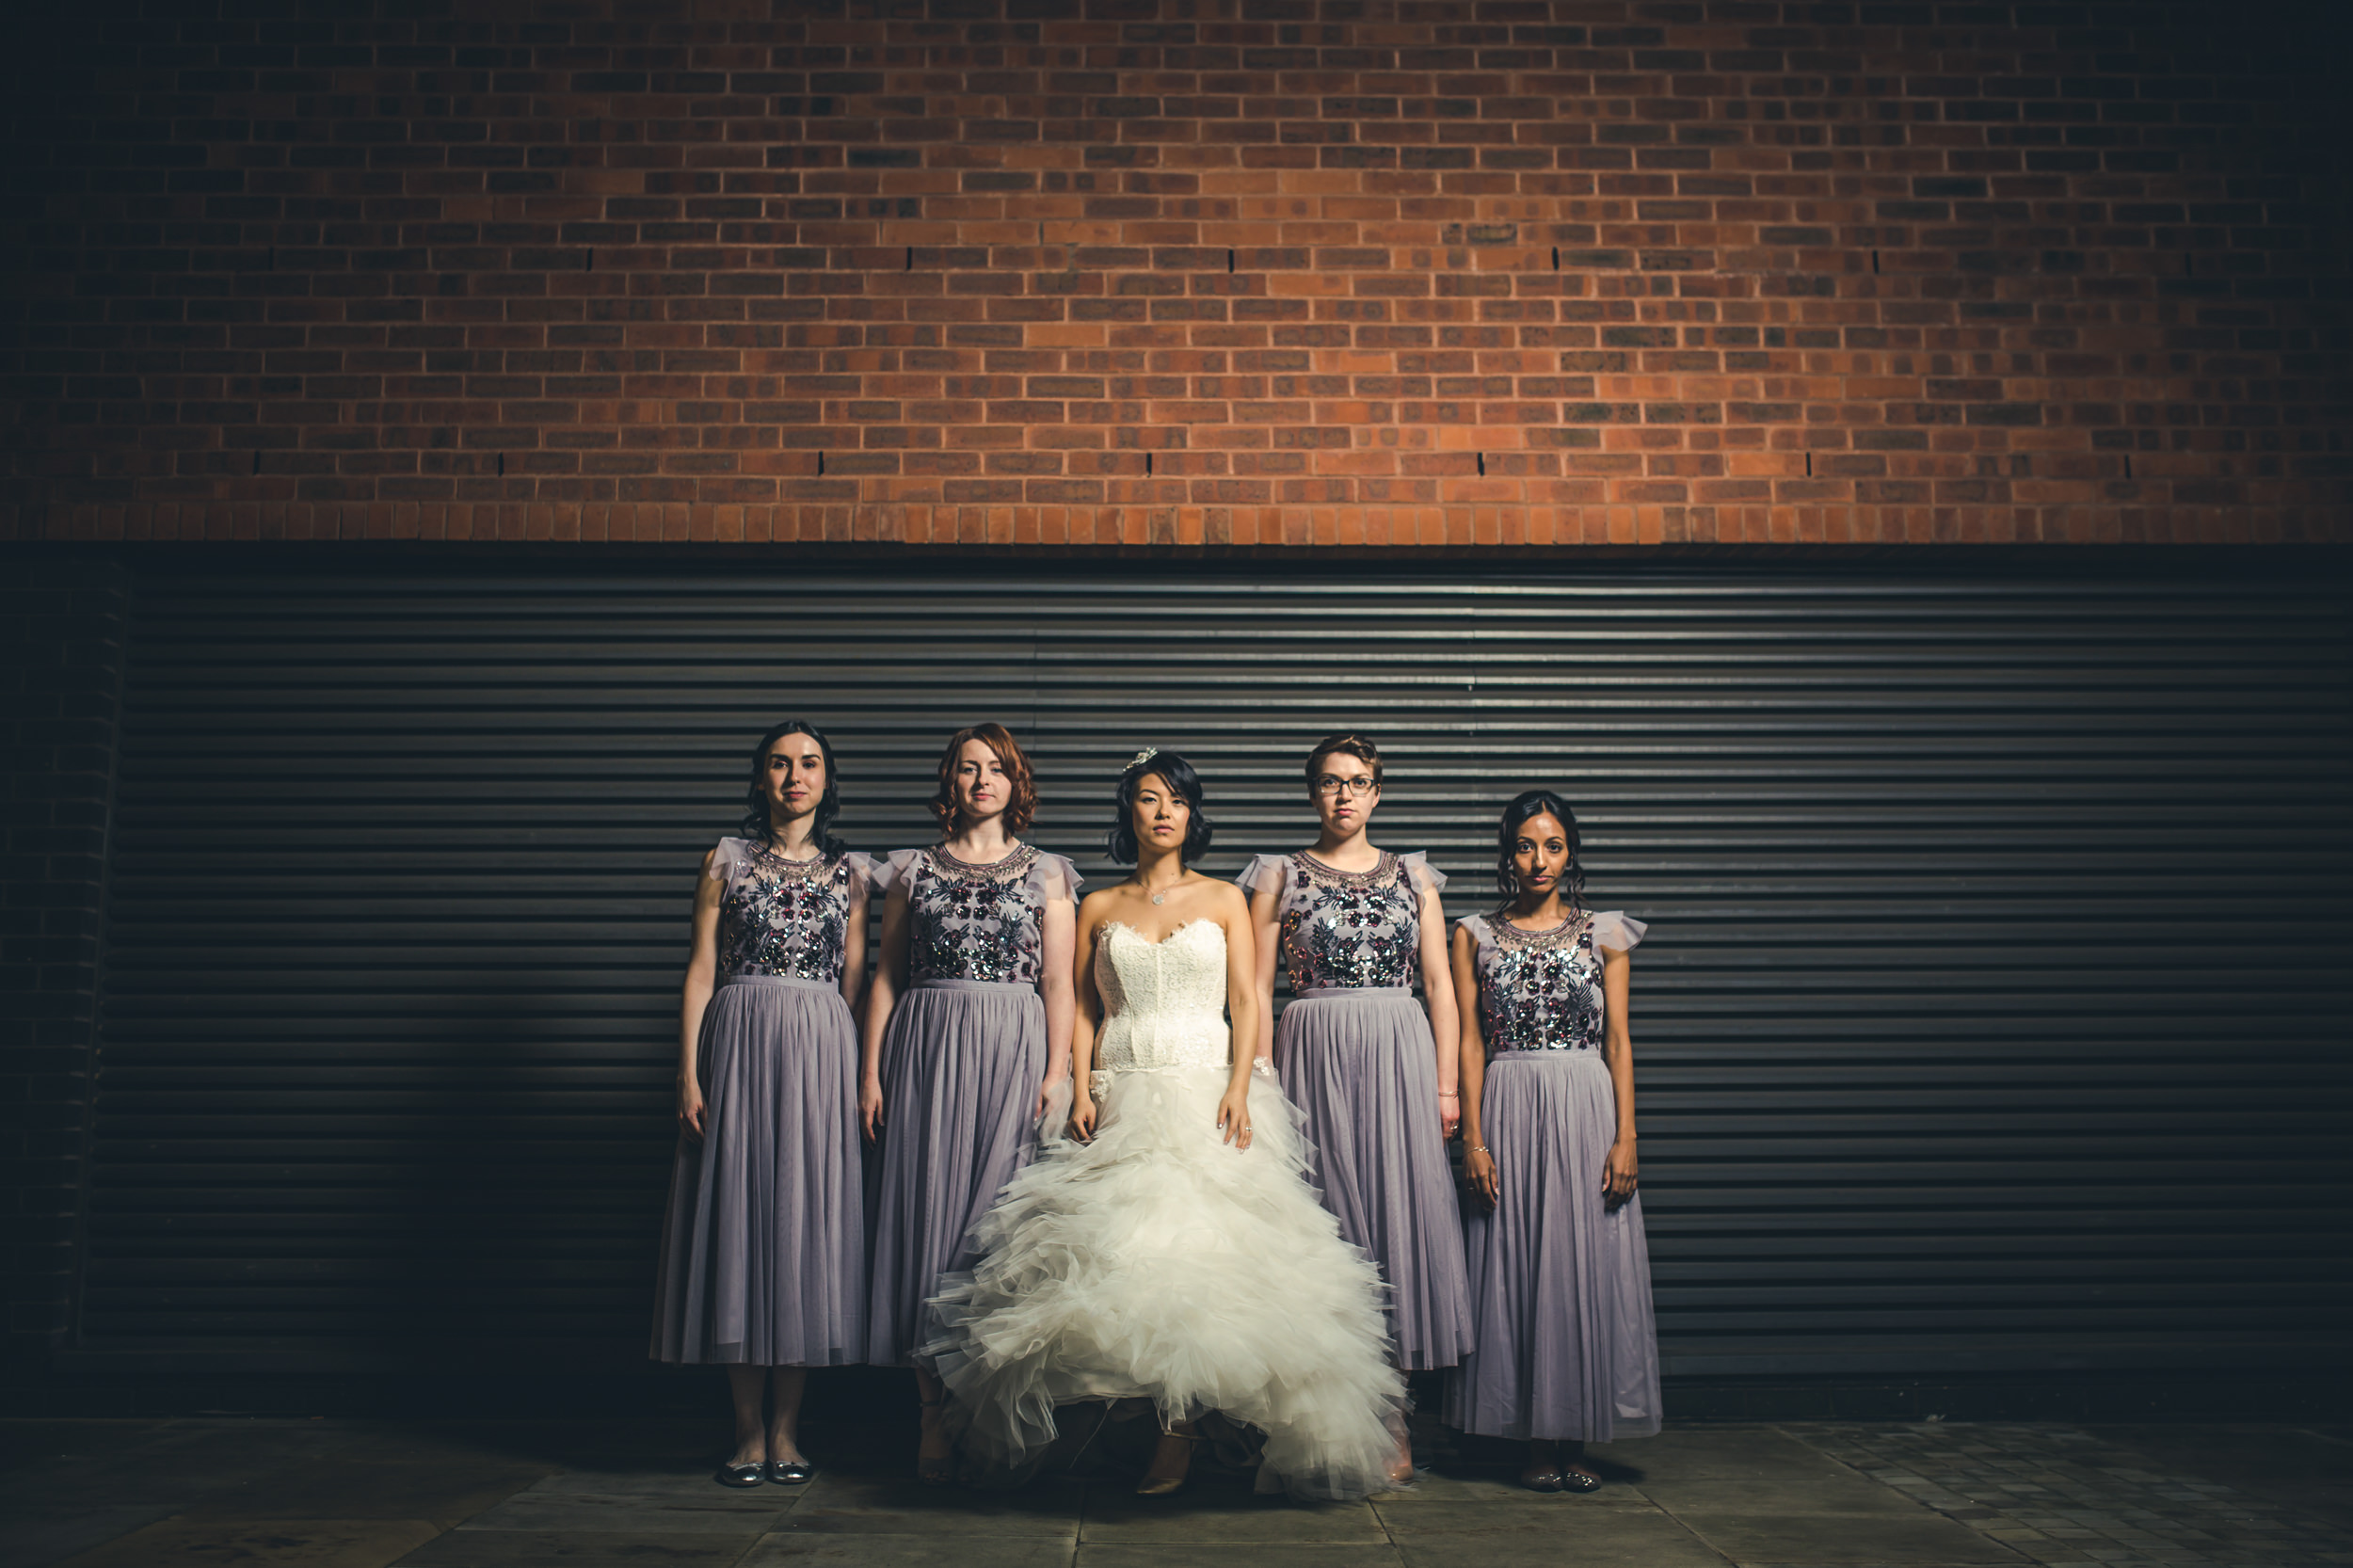 quirky wedding photographers manchester